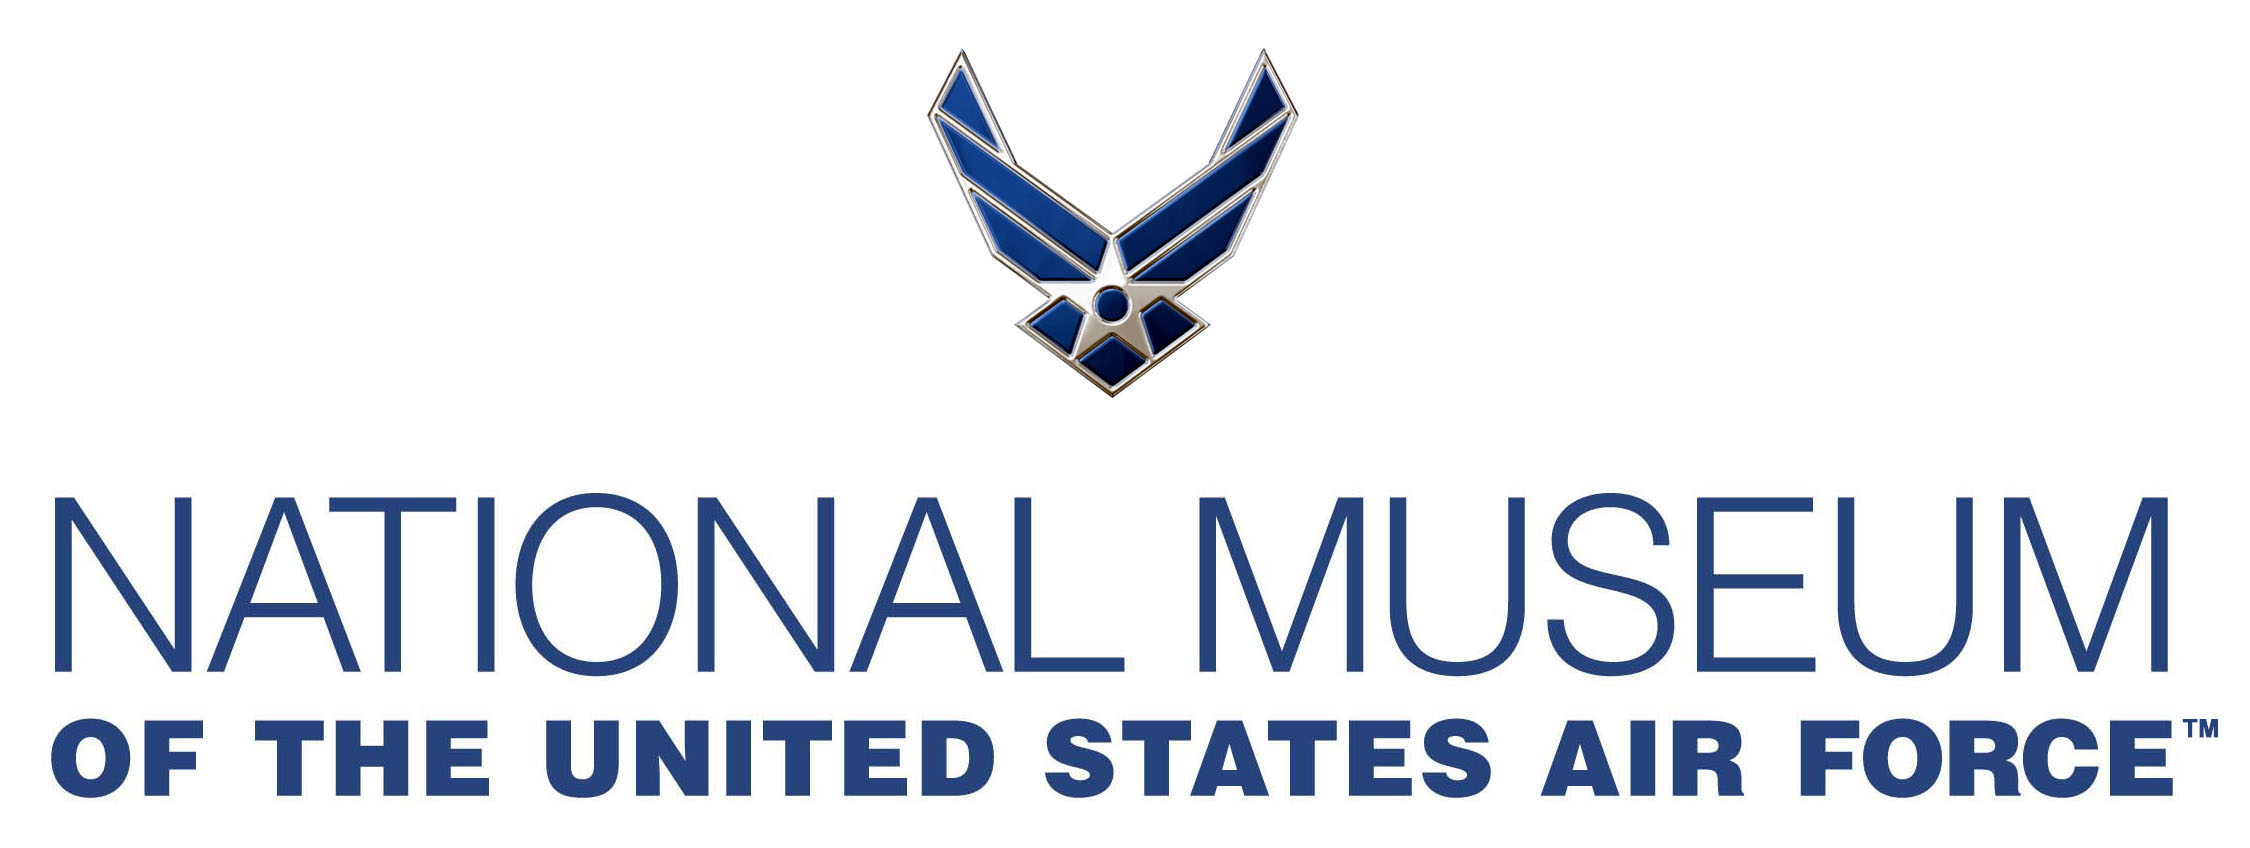 Image of the Air Force wings with the museum name underneath